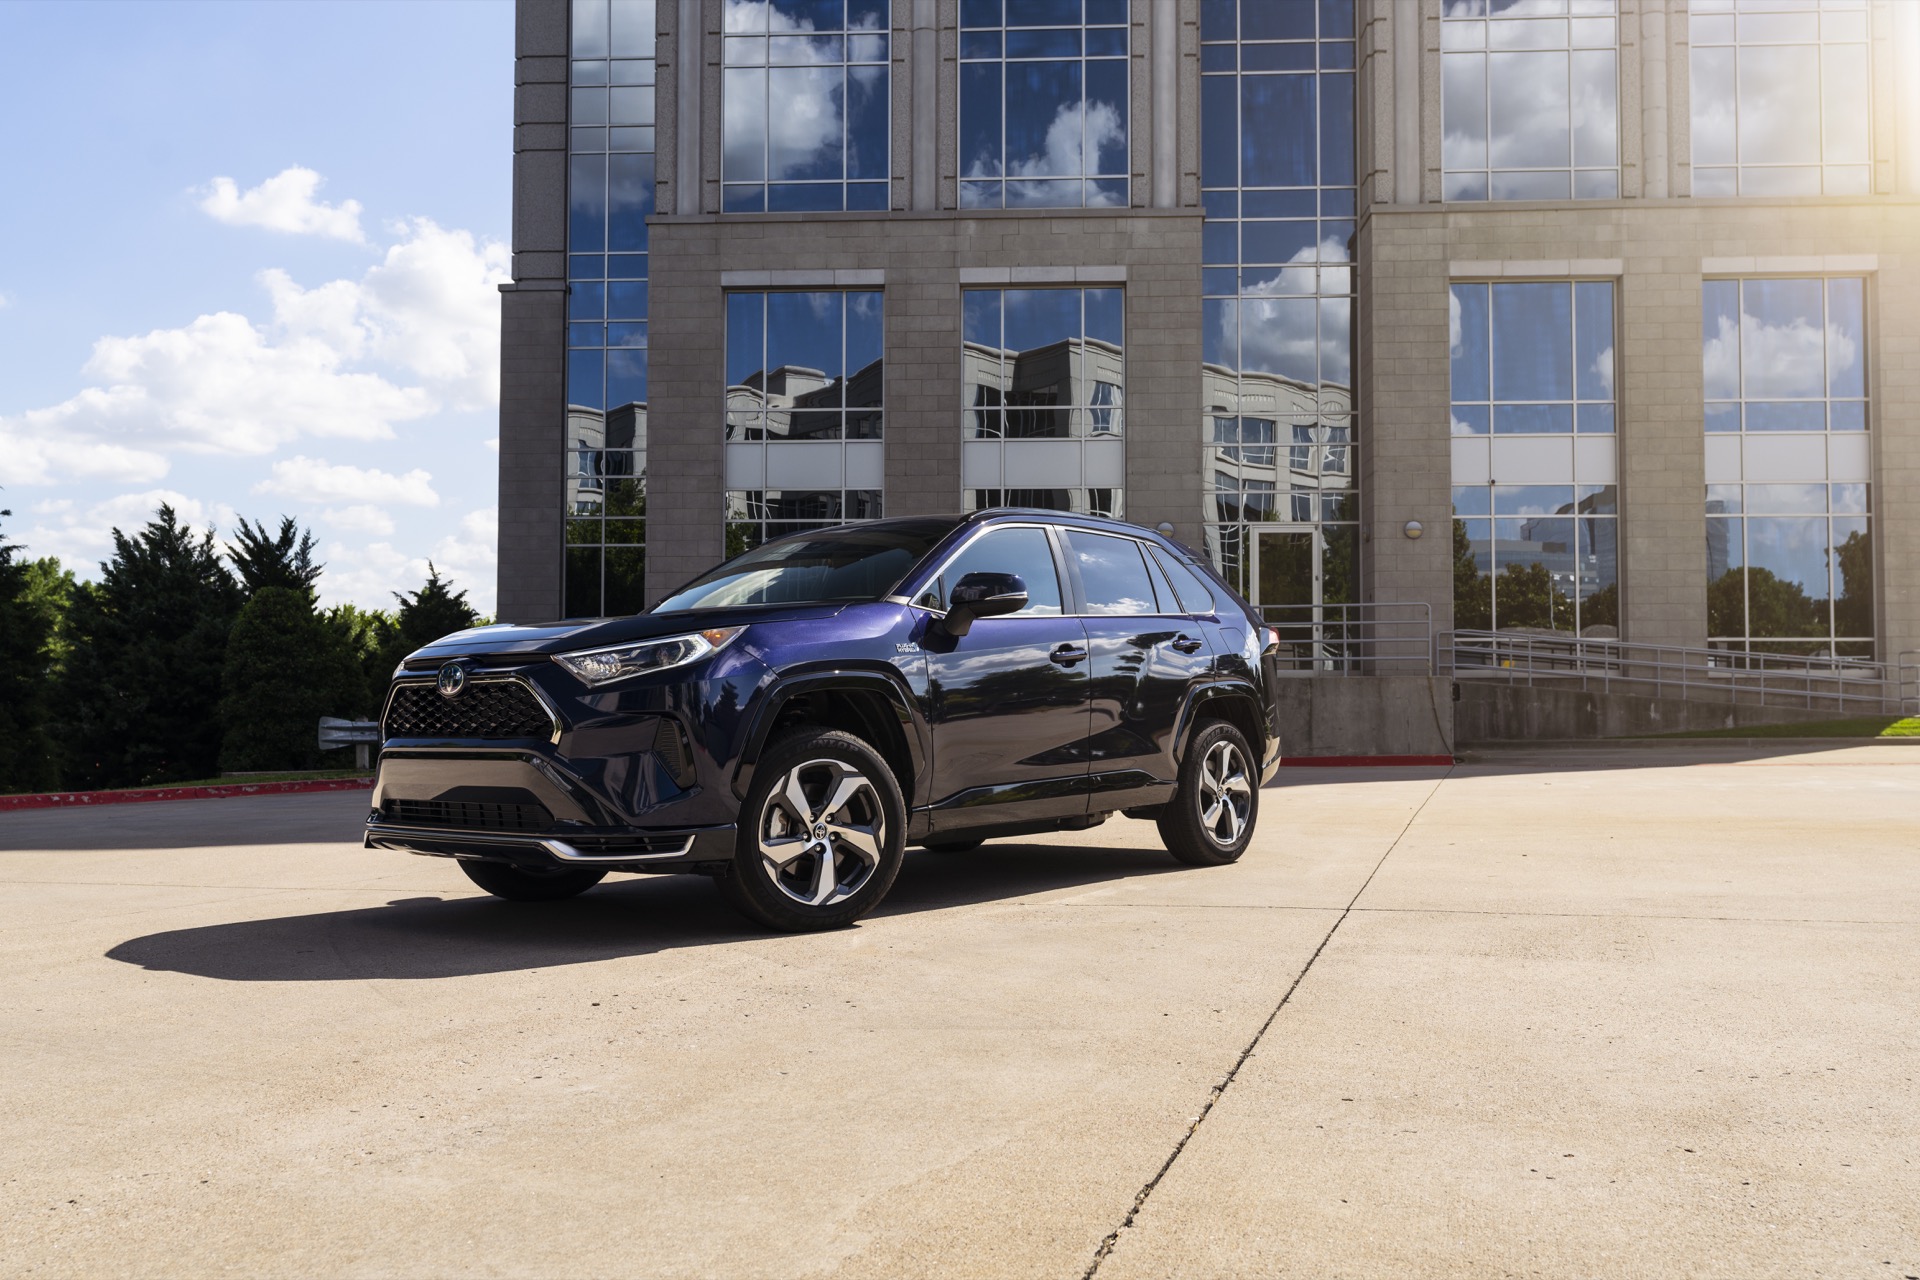 2021 Toyota Rav4 Prime Price Marked Up As Battery Supply Issue